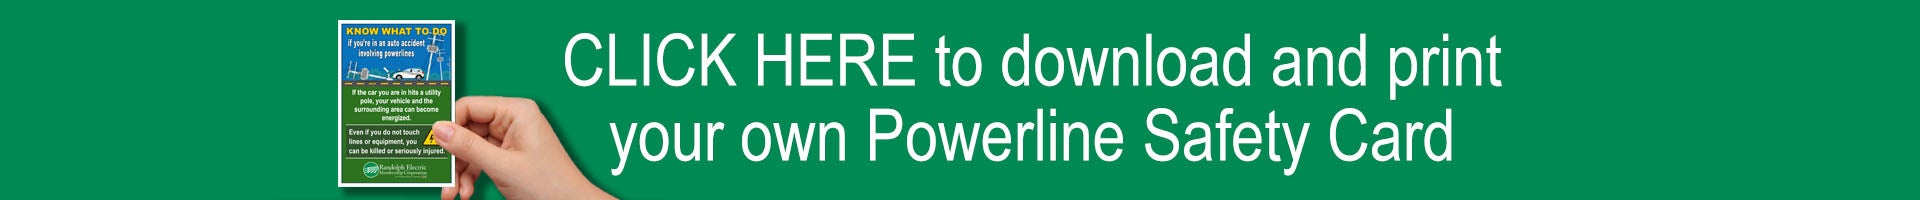 Down Powerline Safety Card Download